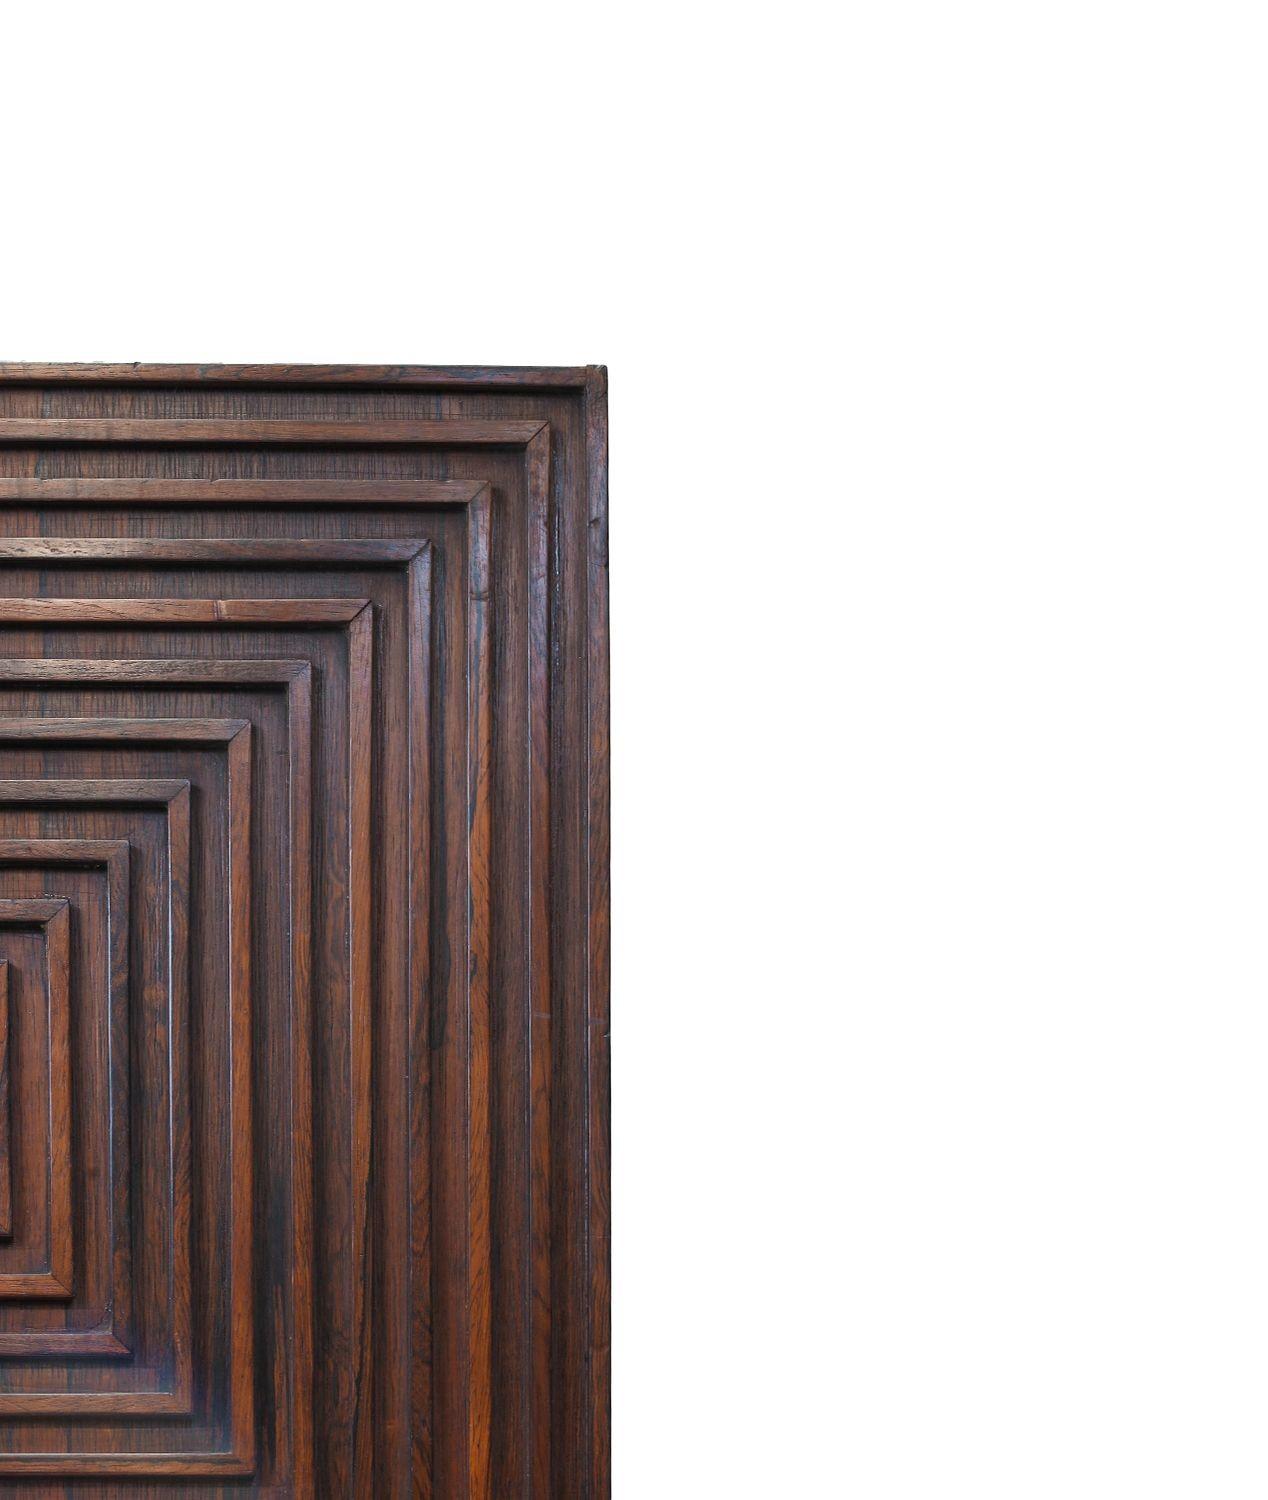 Joaquim Tenreiro, Brazil, c. 1967. Geometric wall-mount sculpture produced in a solid rosewood and designed using a traditional framework known as “Muxarabi” technique including a particular diamond wood cut in the center.
Measurements
W 23.5'' x D